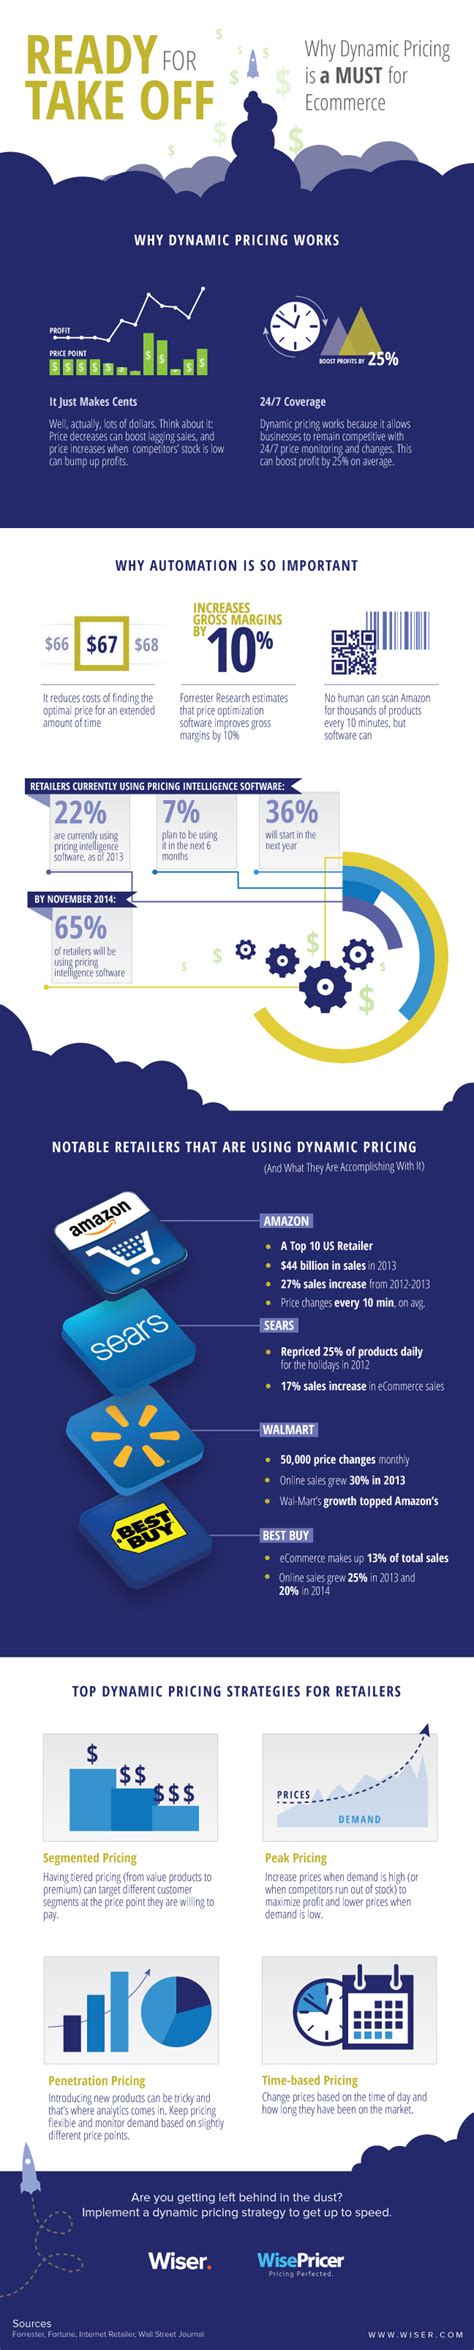 Wisers New Infographic Shows Why Dynamic Pricing Is A Must For Ecommerce